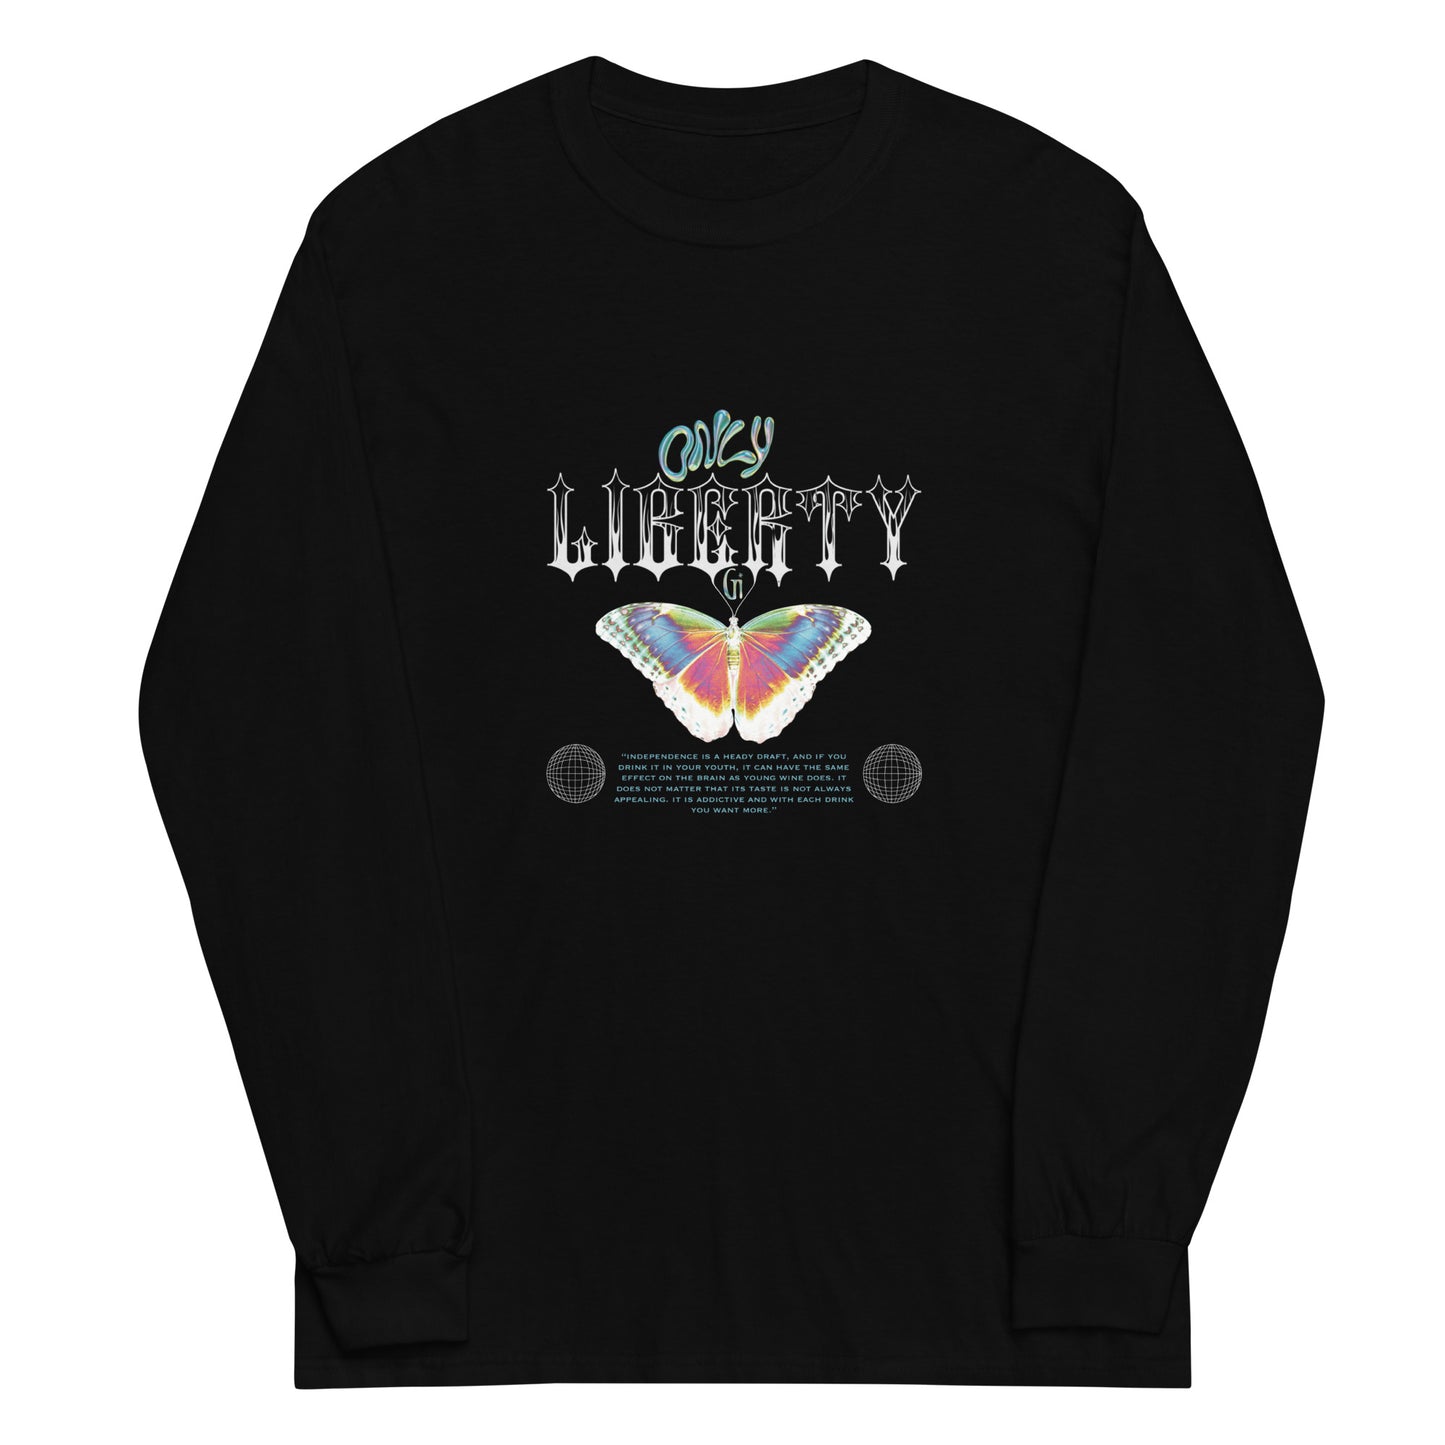 black unisex long sleeve with butterfly print